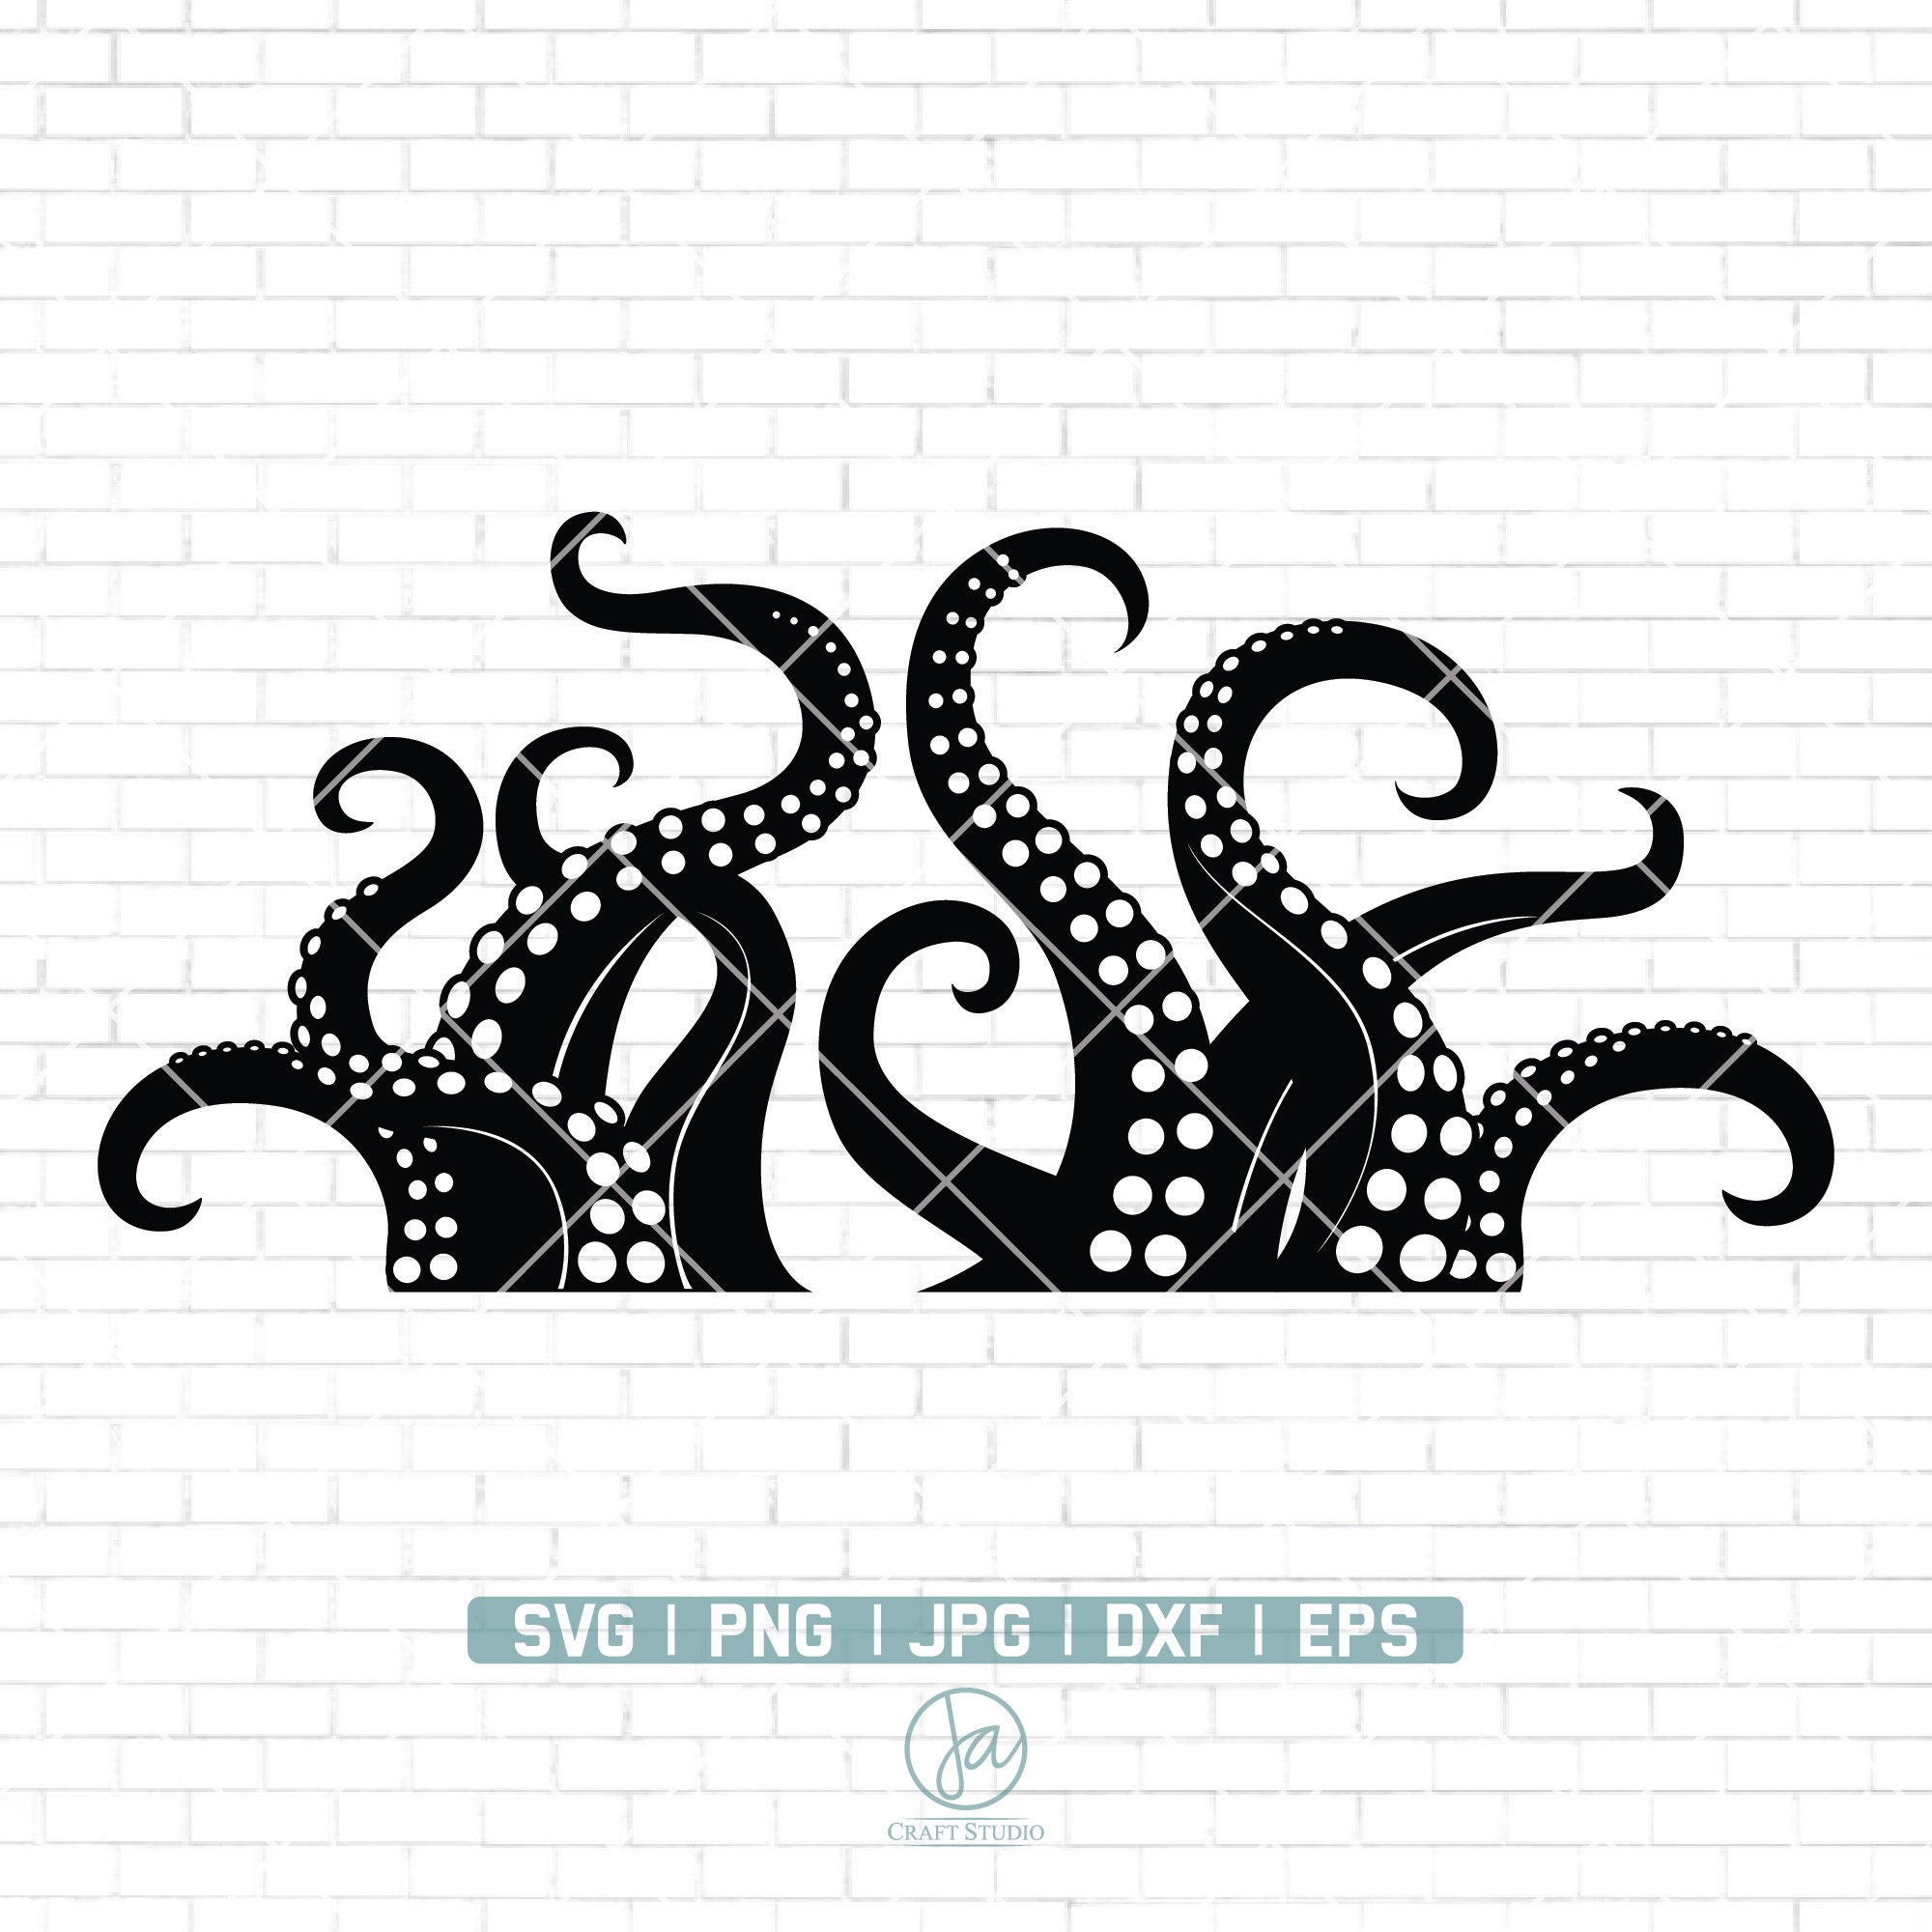 Kraken with title stock vector. Illustration of mythical - 49866645